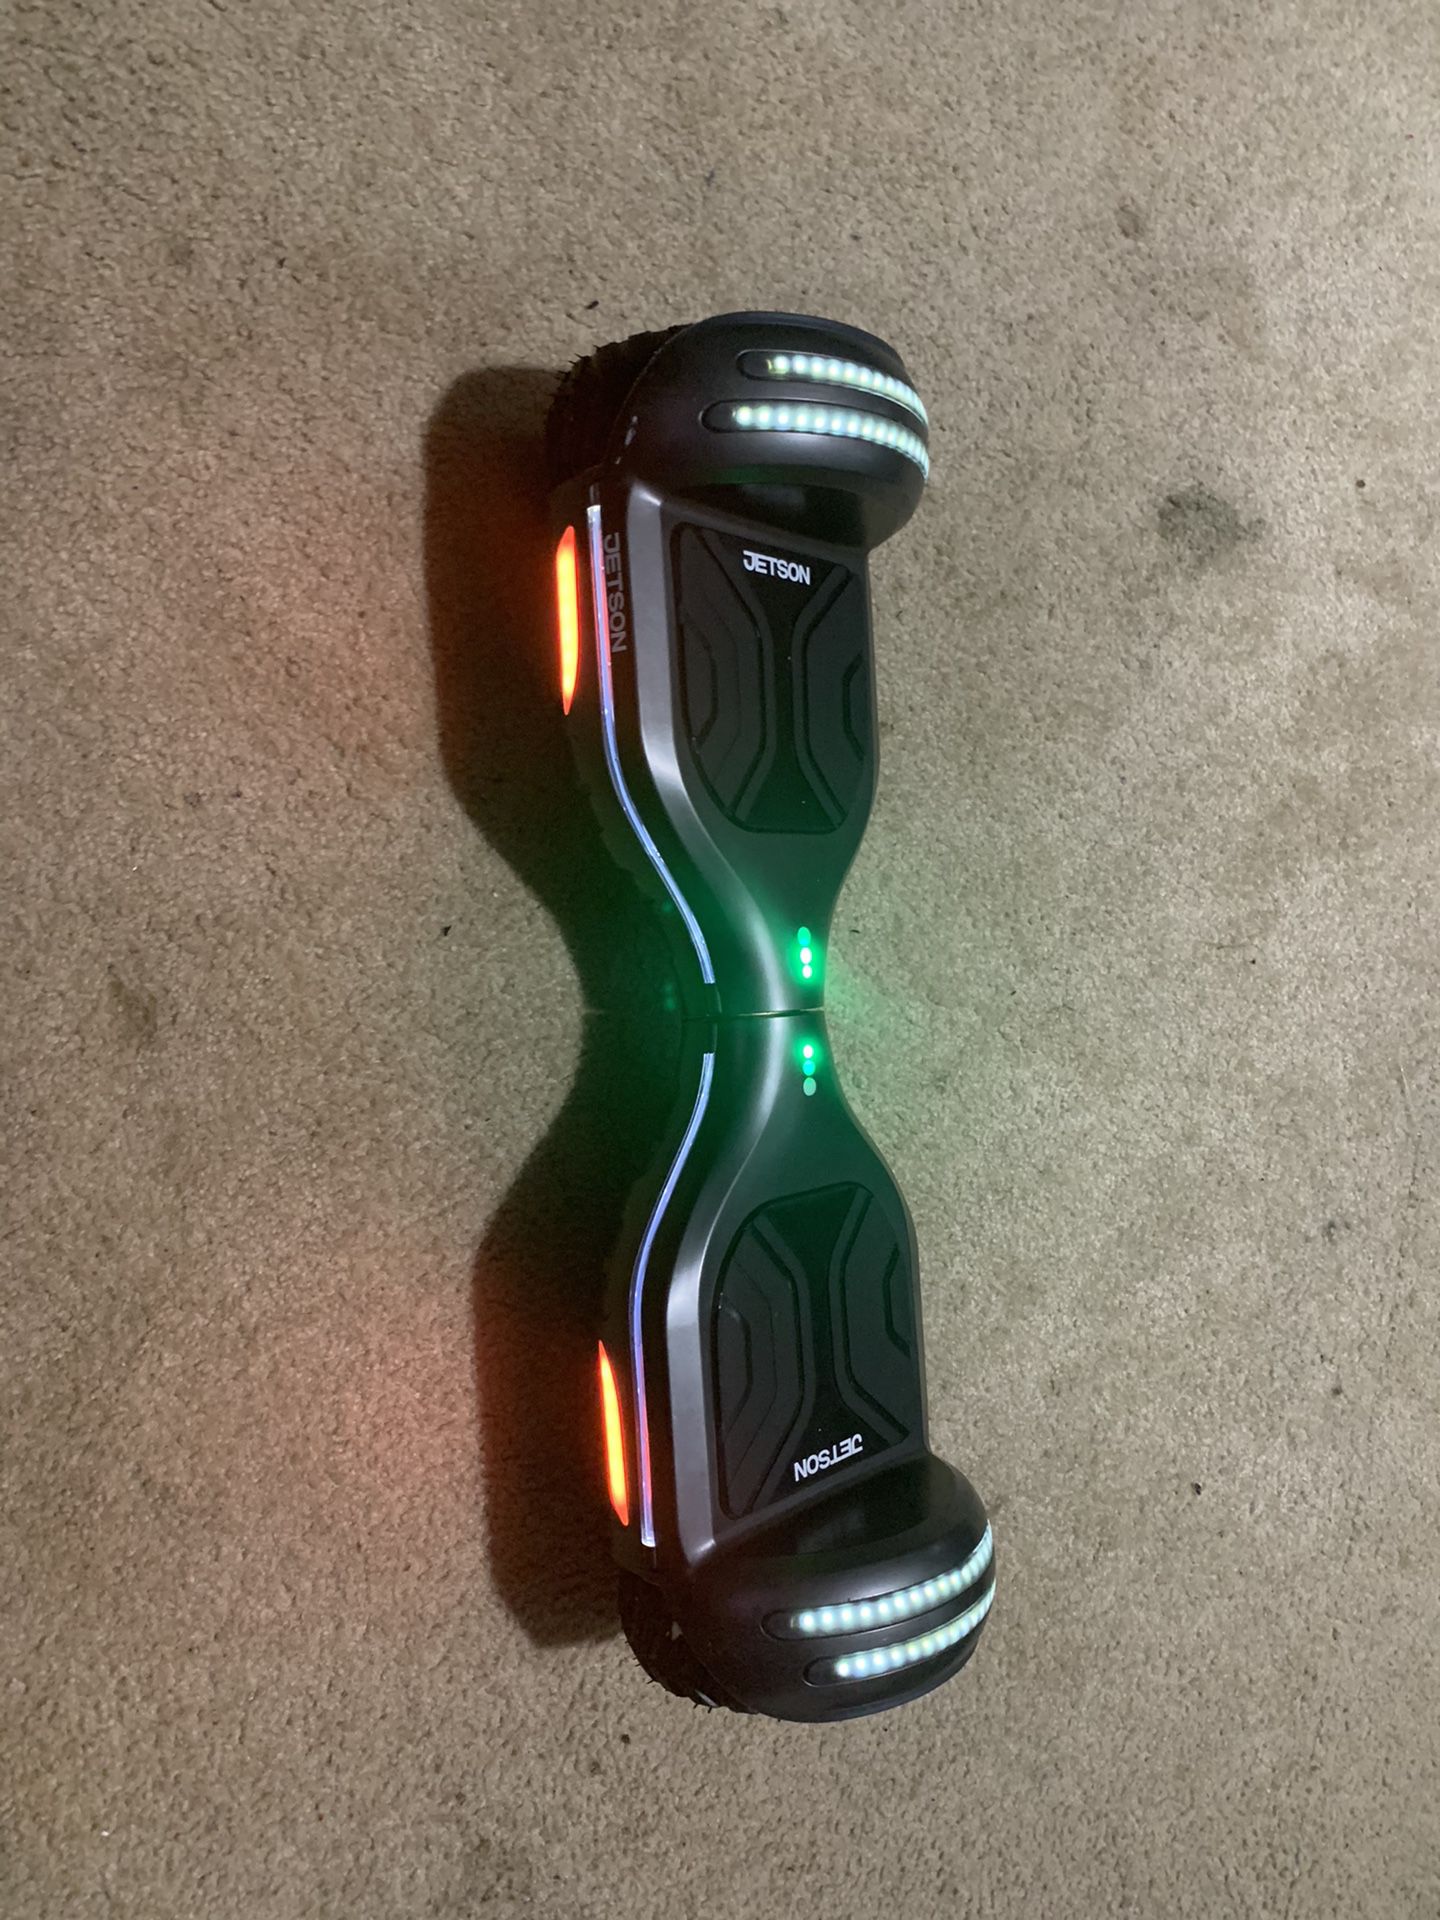 Jetson x10 Hoverboard w/Bluetooth speaker and color LED lights